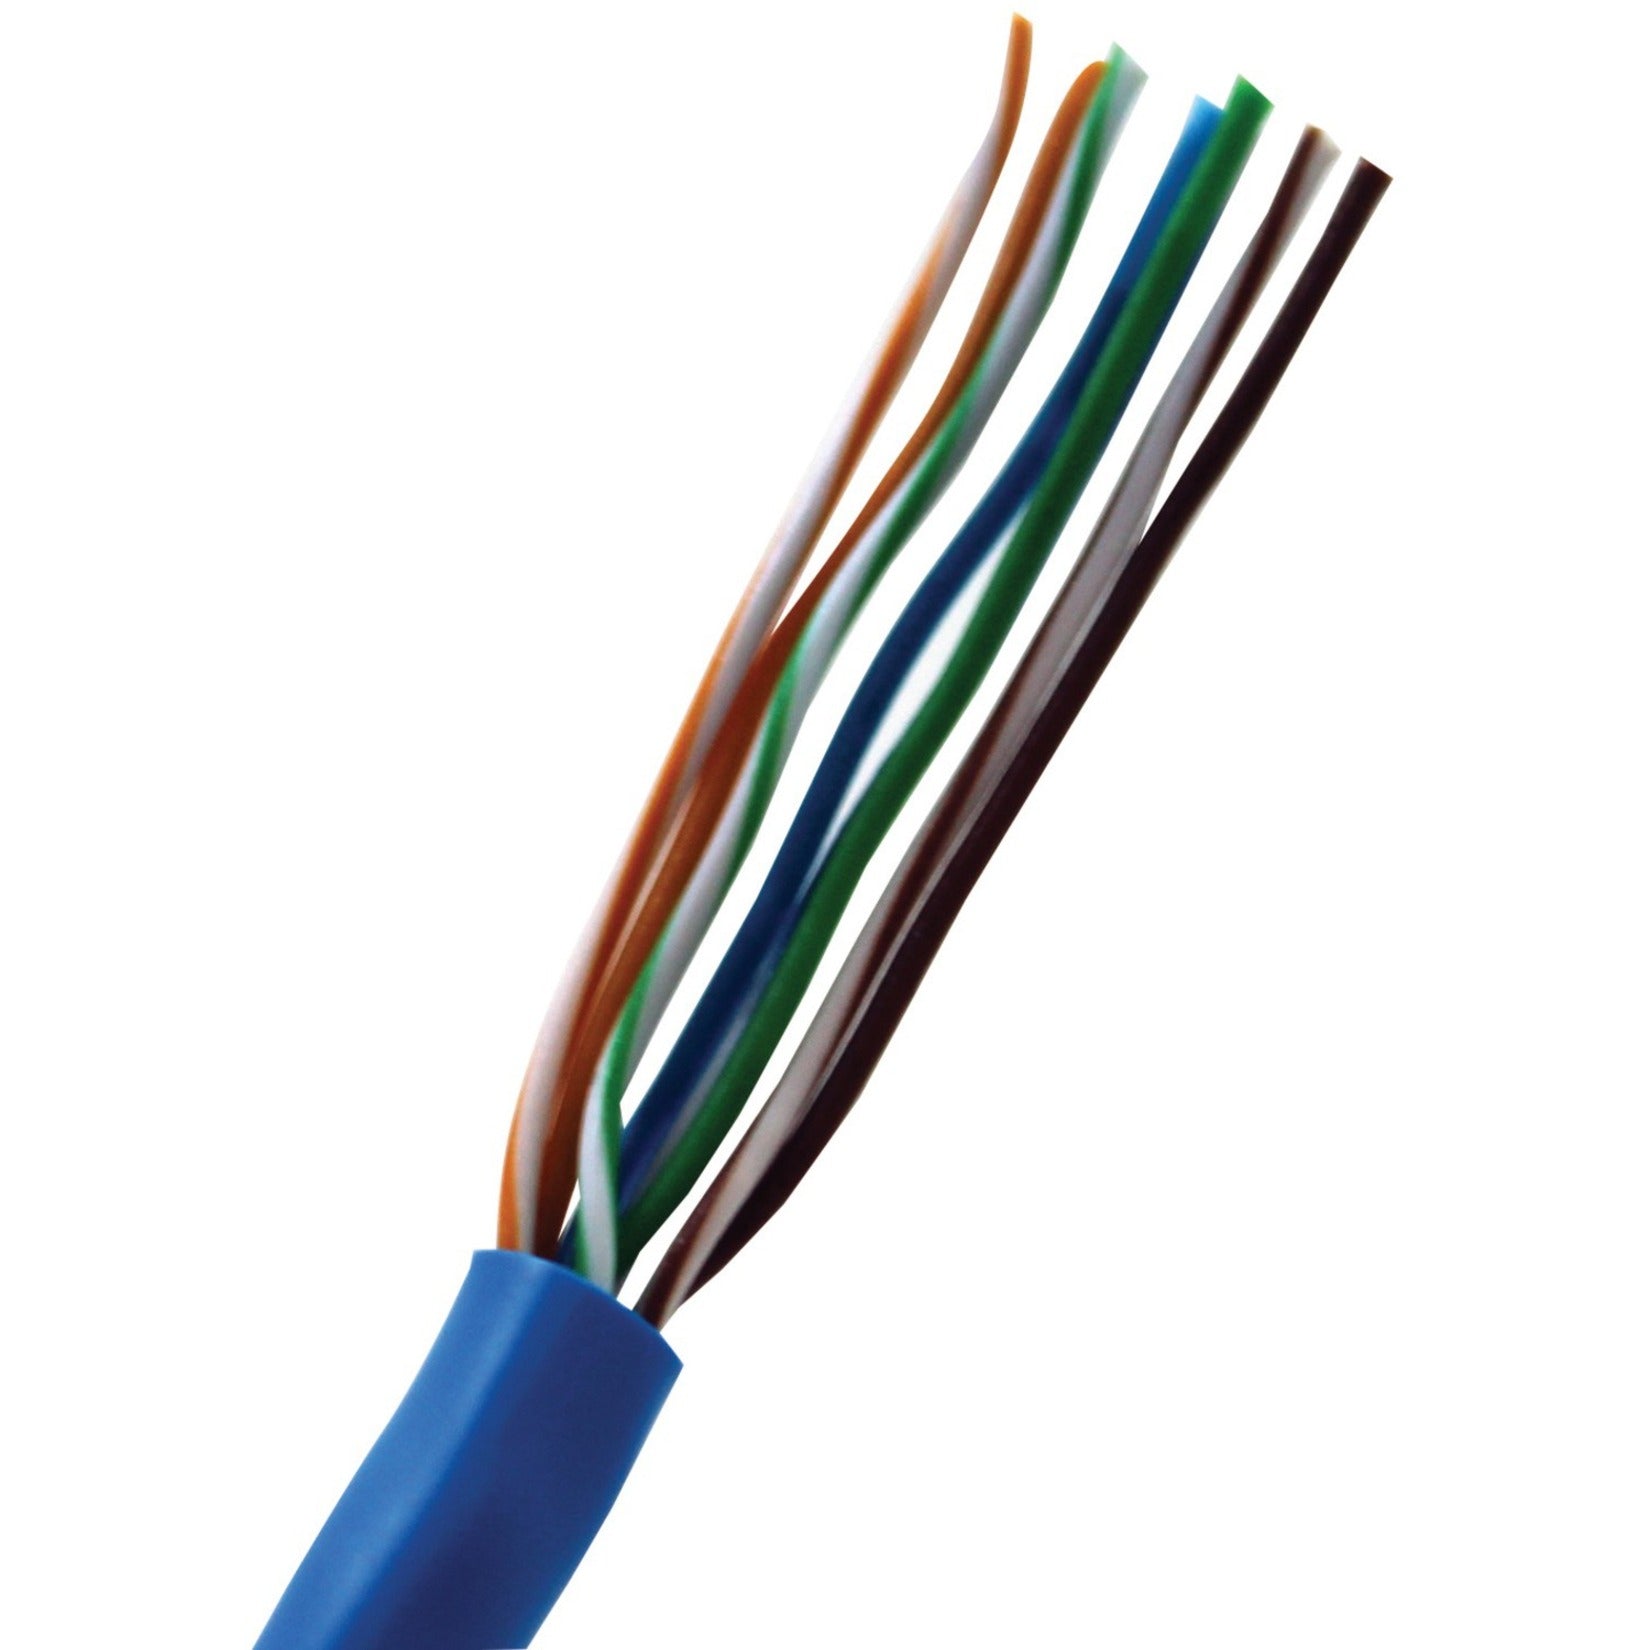 IDEAL 85-371 Feed-Thru CAT5e RJ-45 8P8C Modular Plugs, Network Connector with Strain Relief